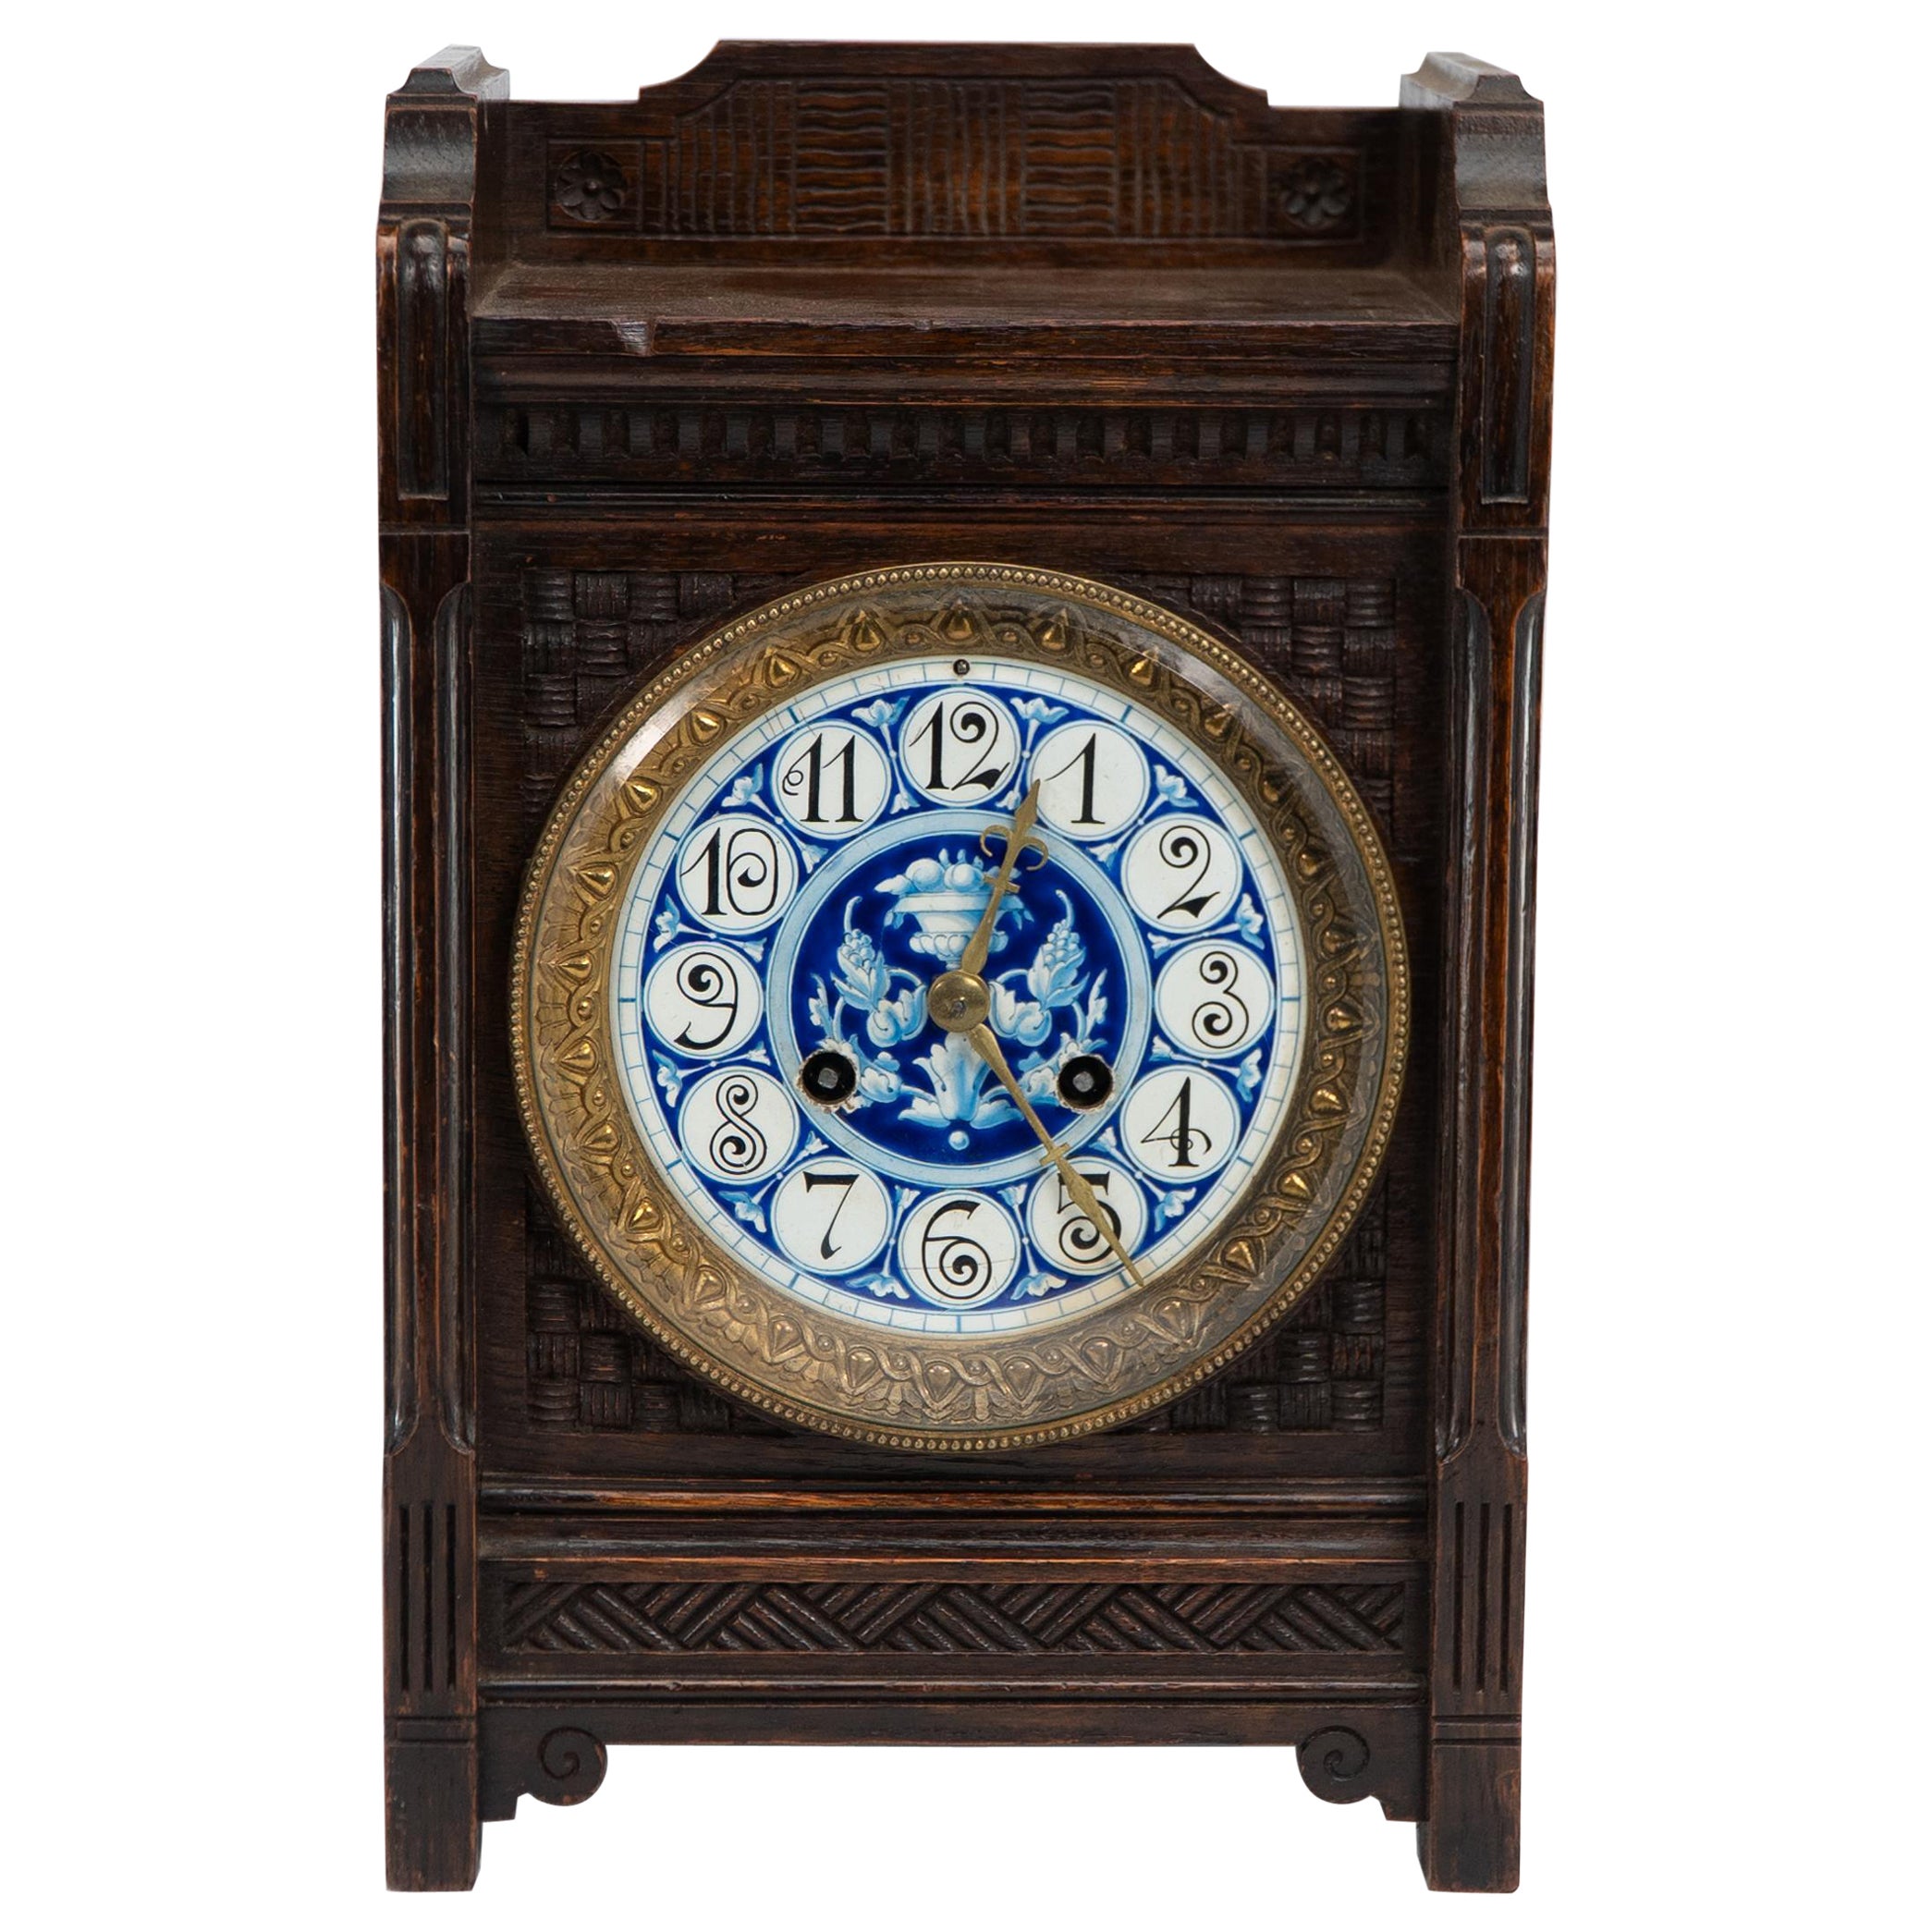 An Anglo-Japanese carved oak mantel clock with hand painted blue floral dial. For Sale